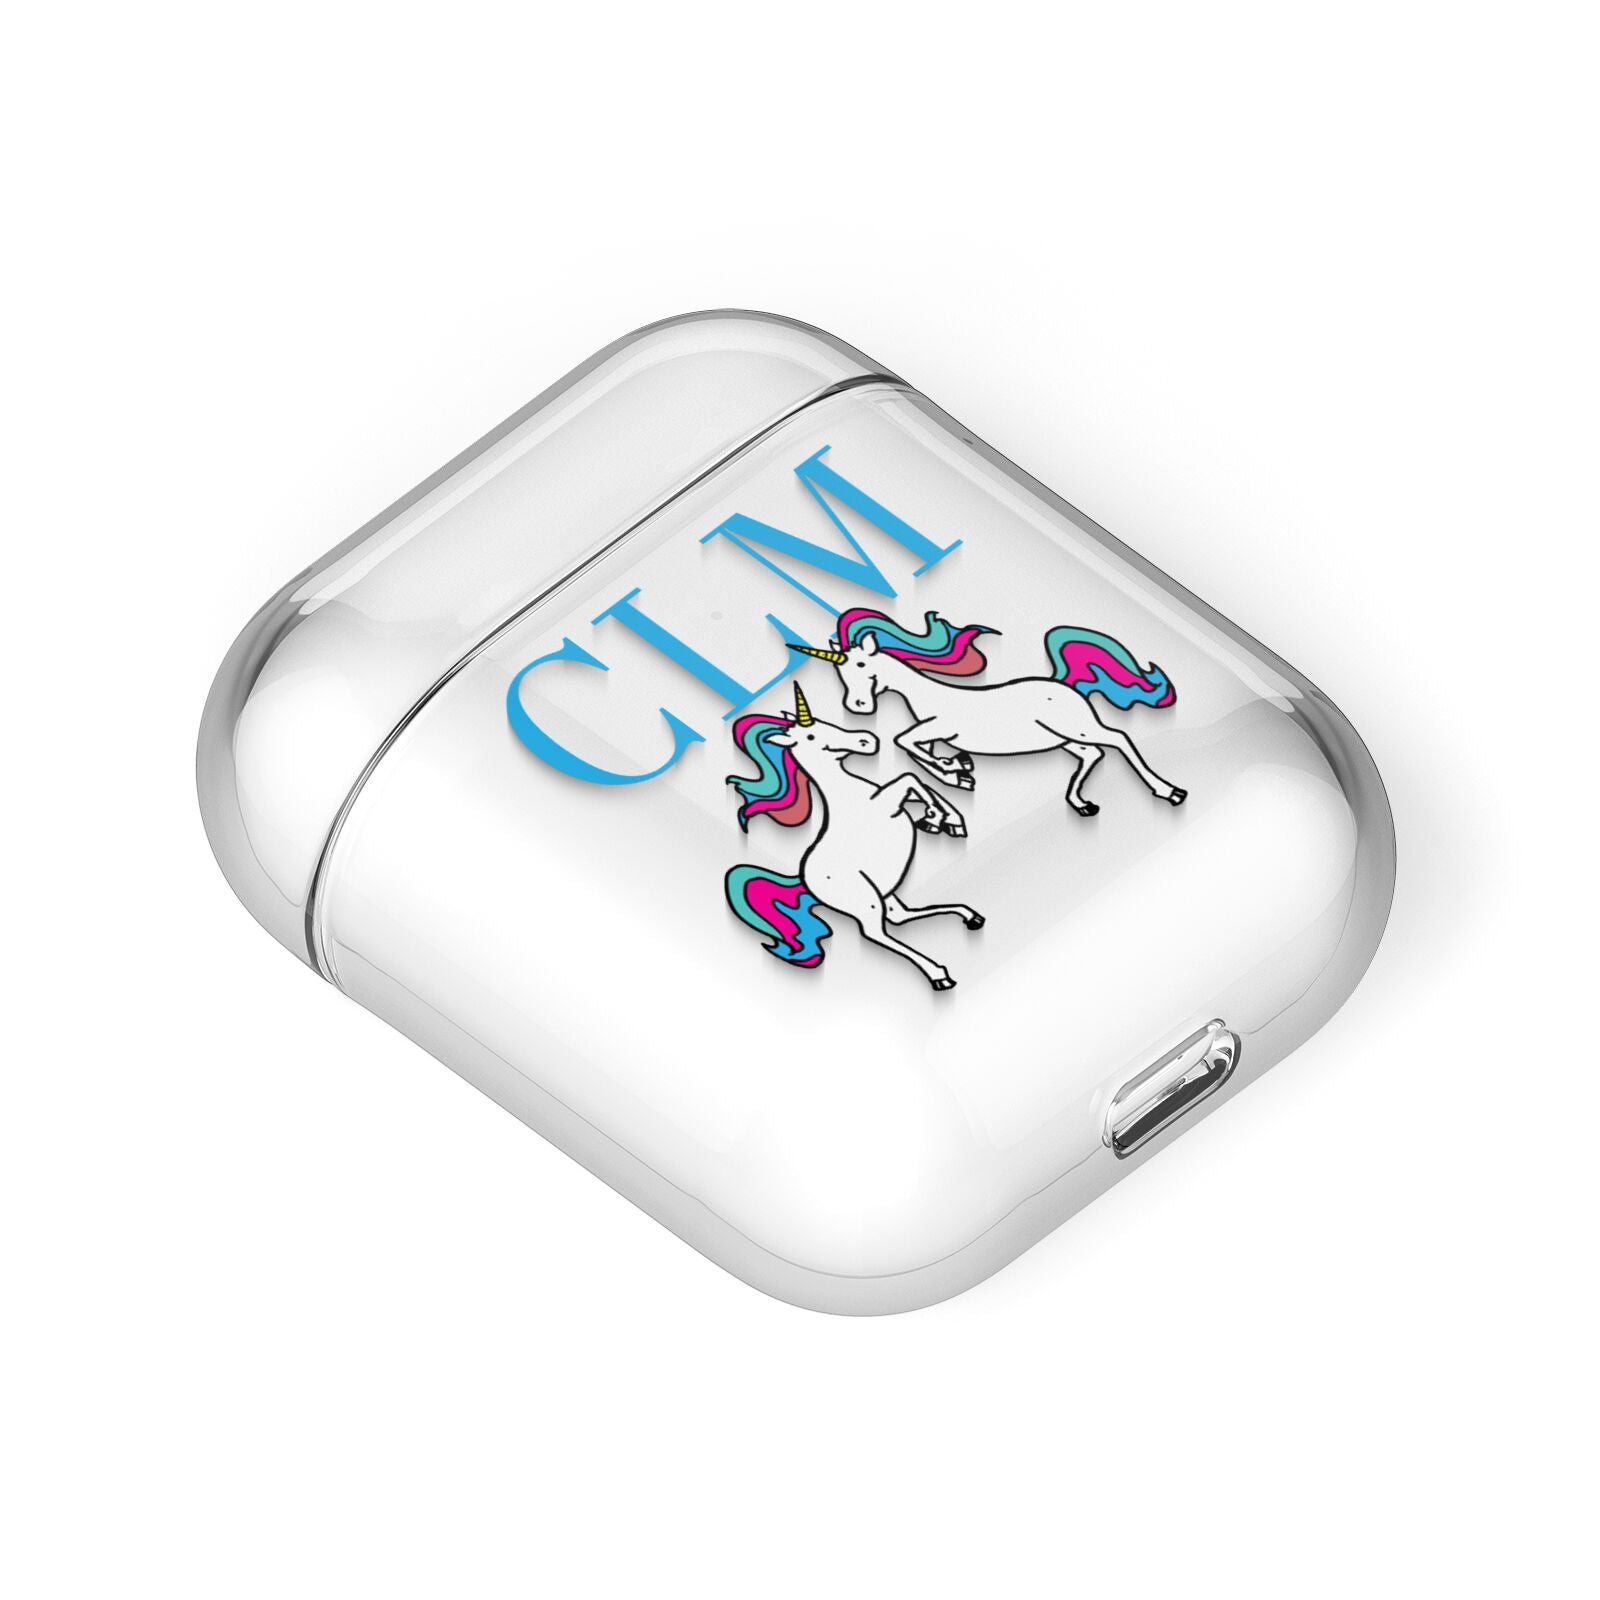 Personalised Unicorn Monogrammed AirPods Case Laid Flat